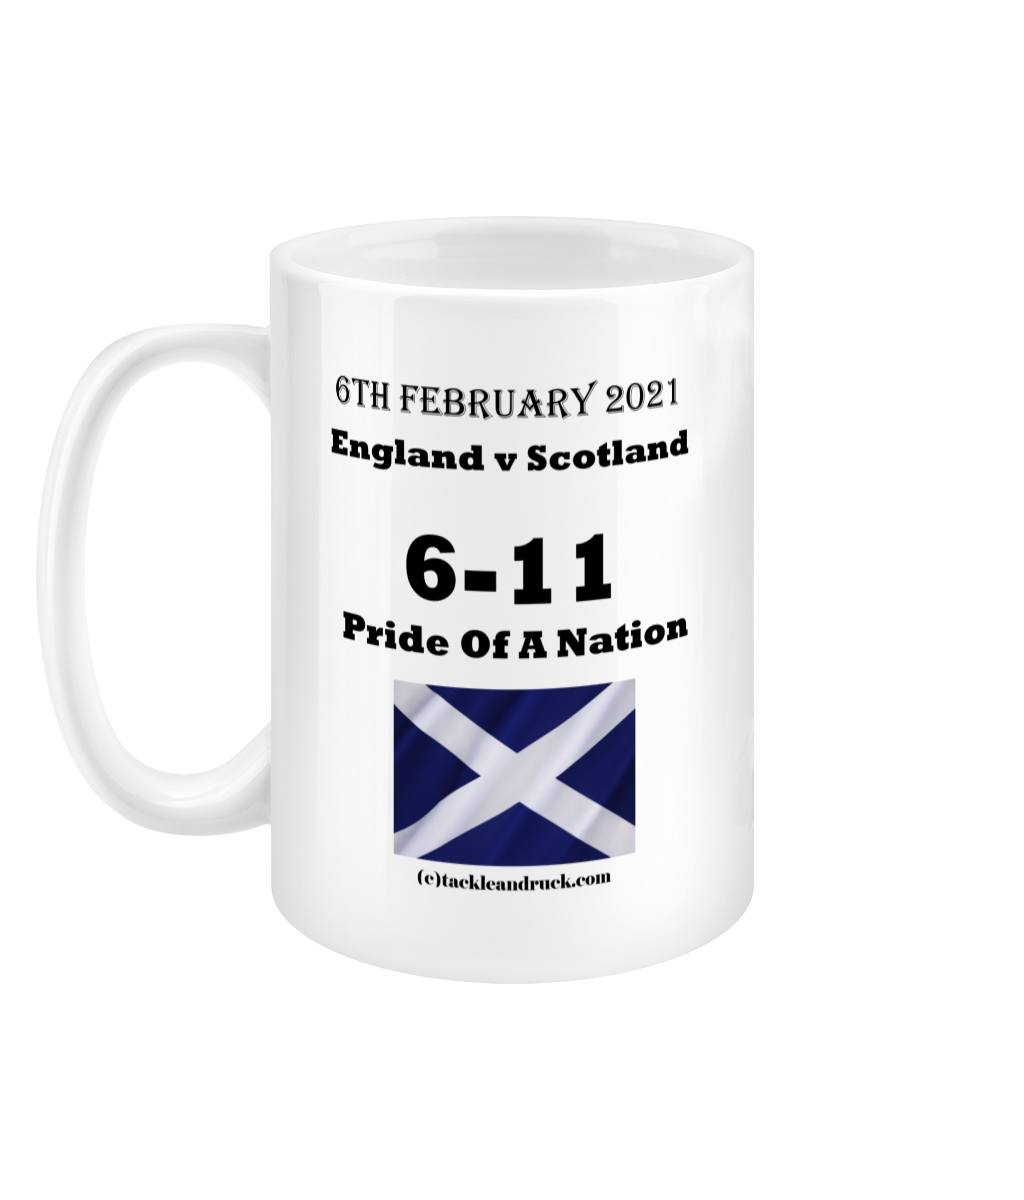 Tackle and Ruck - Calcutta Cup 2021 Win -15oz Mug Pride Of A Nation